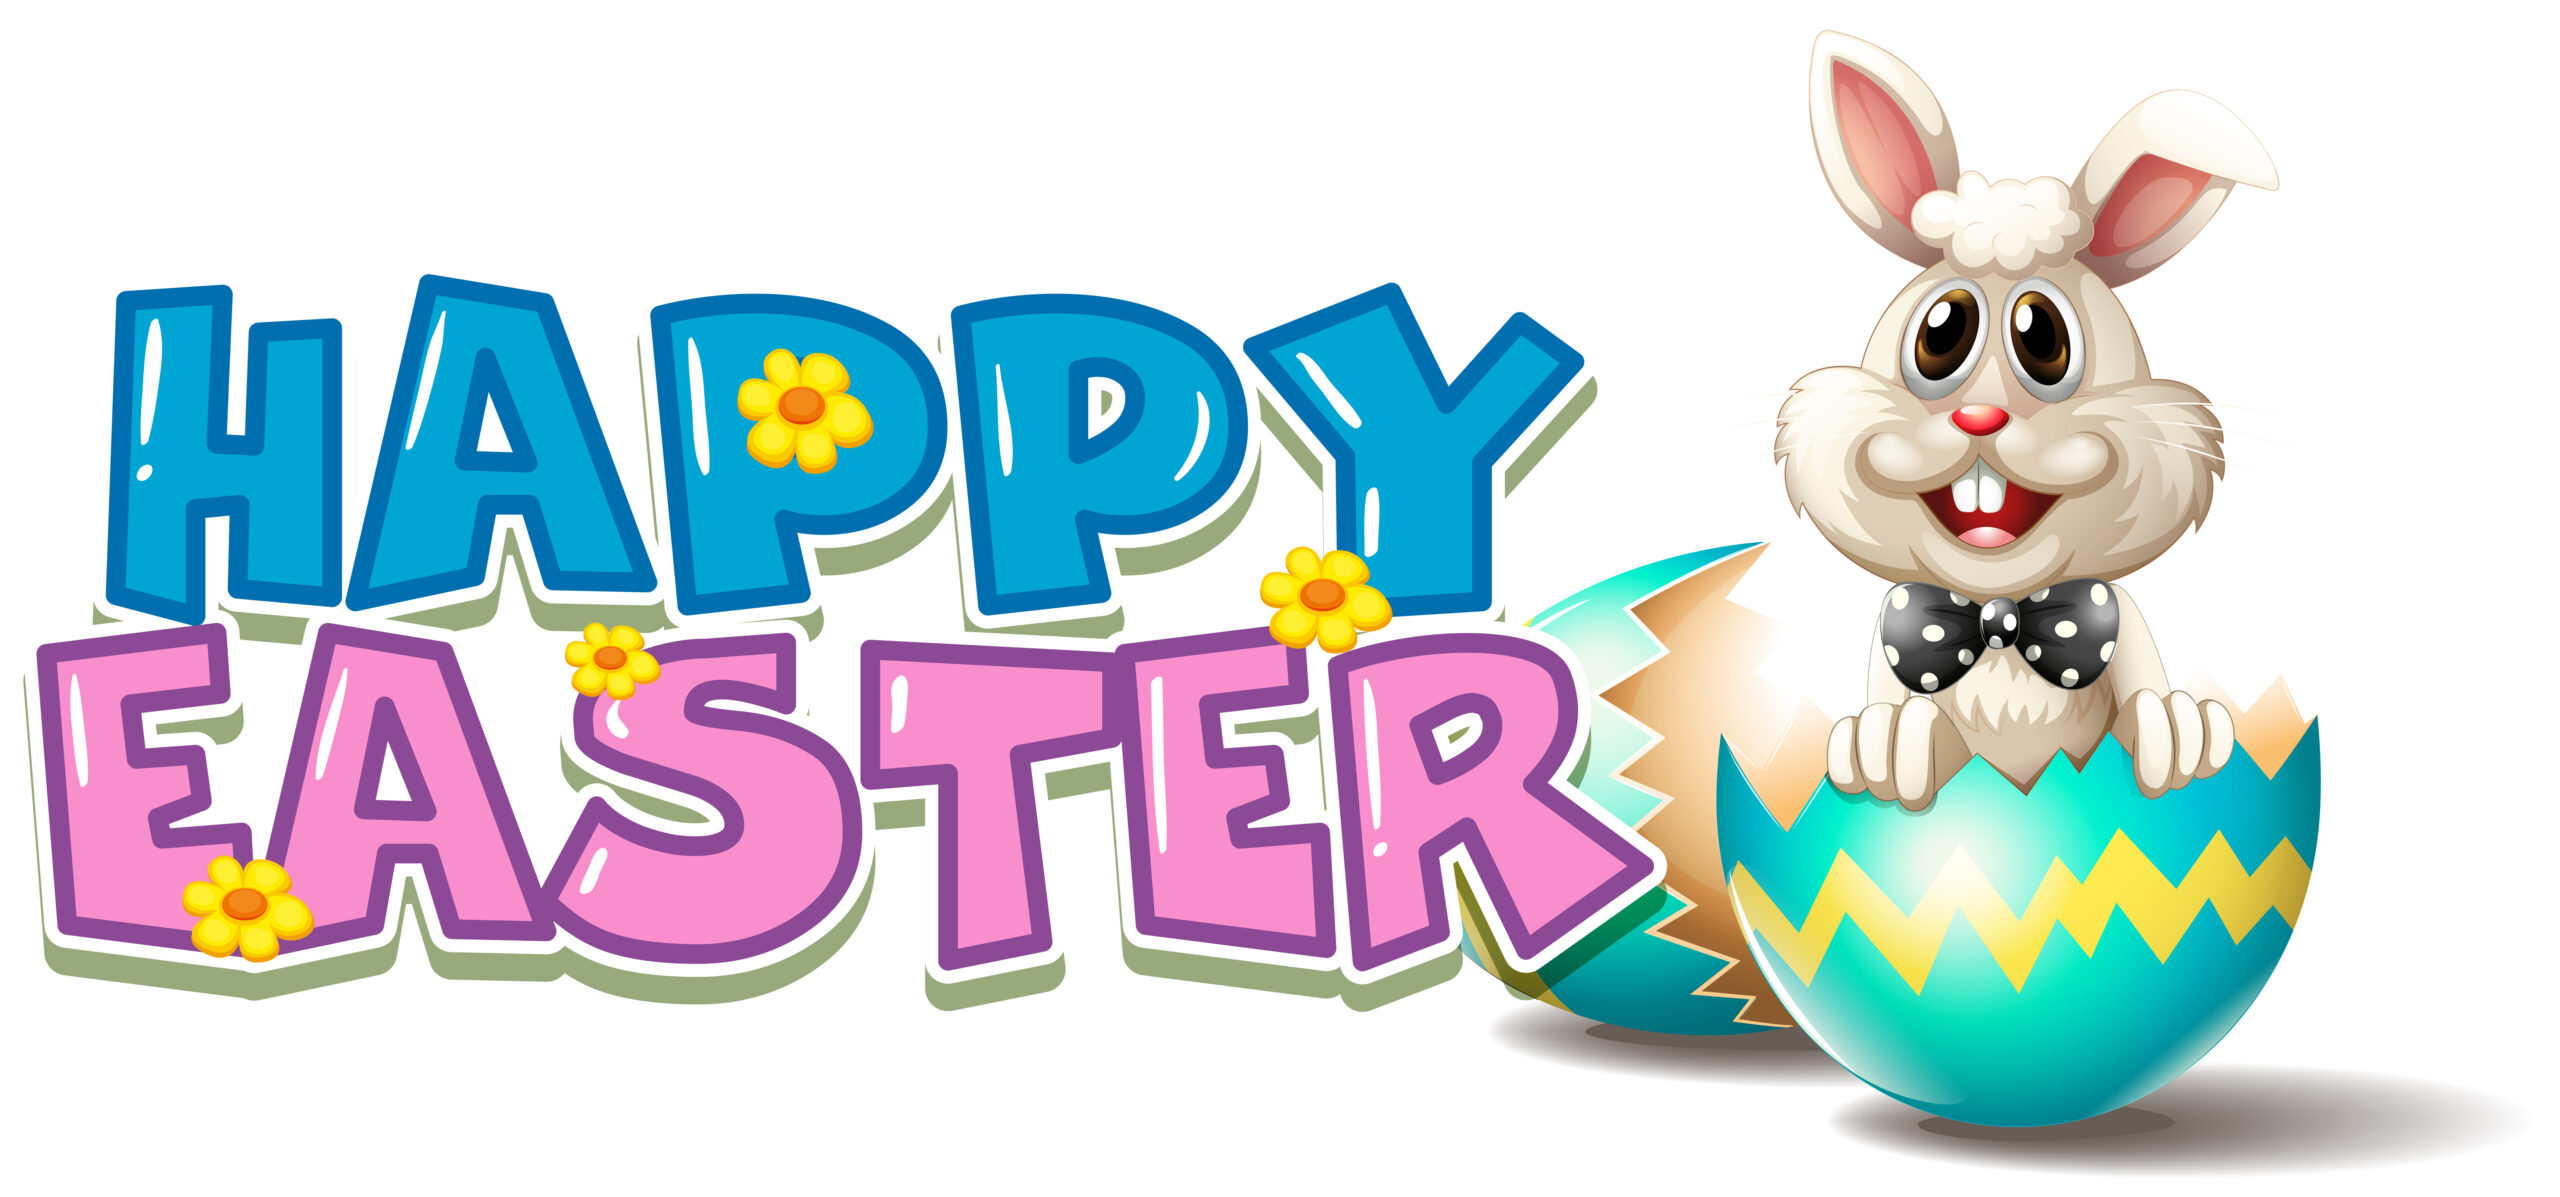 Happy Easter poster with bunny in blue egg illustration